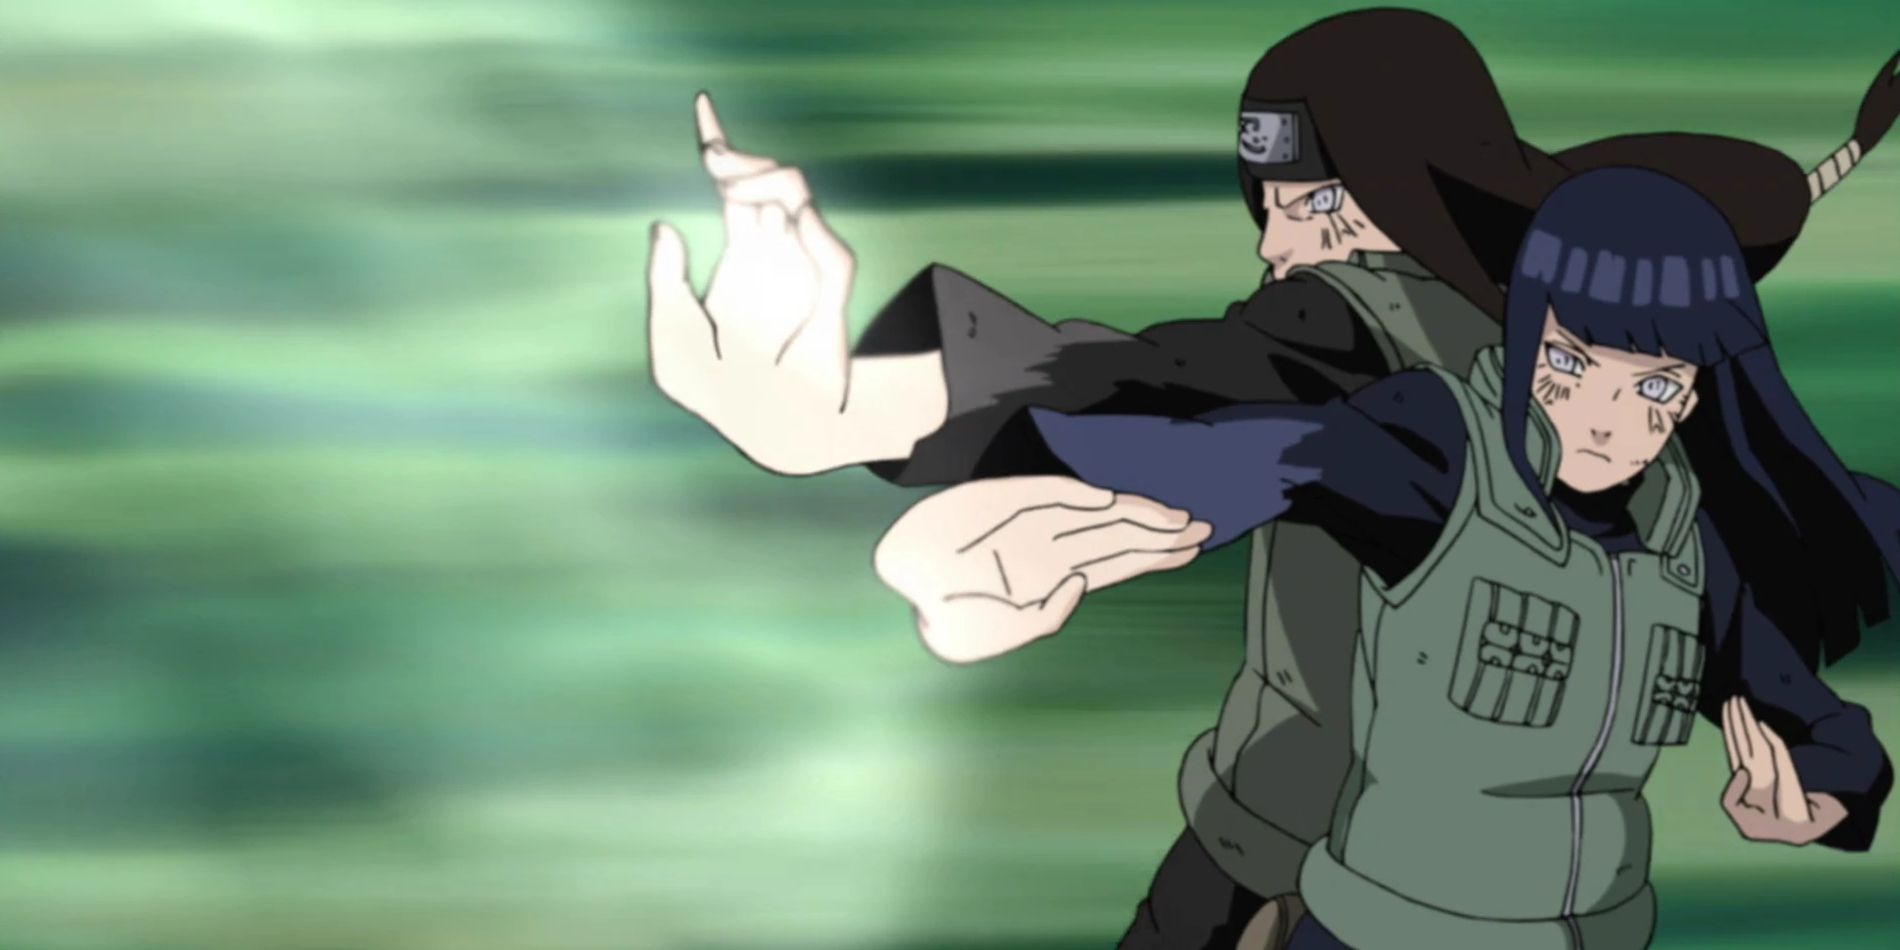 Screenshot from Naruto shippuden anime shows Neji and Hinata back to back using a palm strike that forces air away from them.